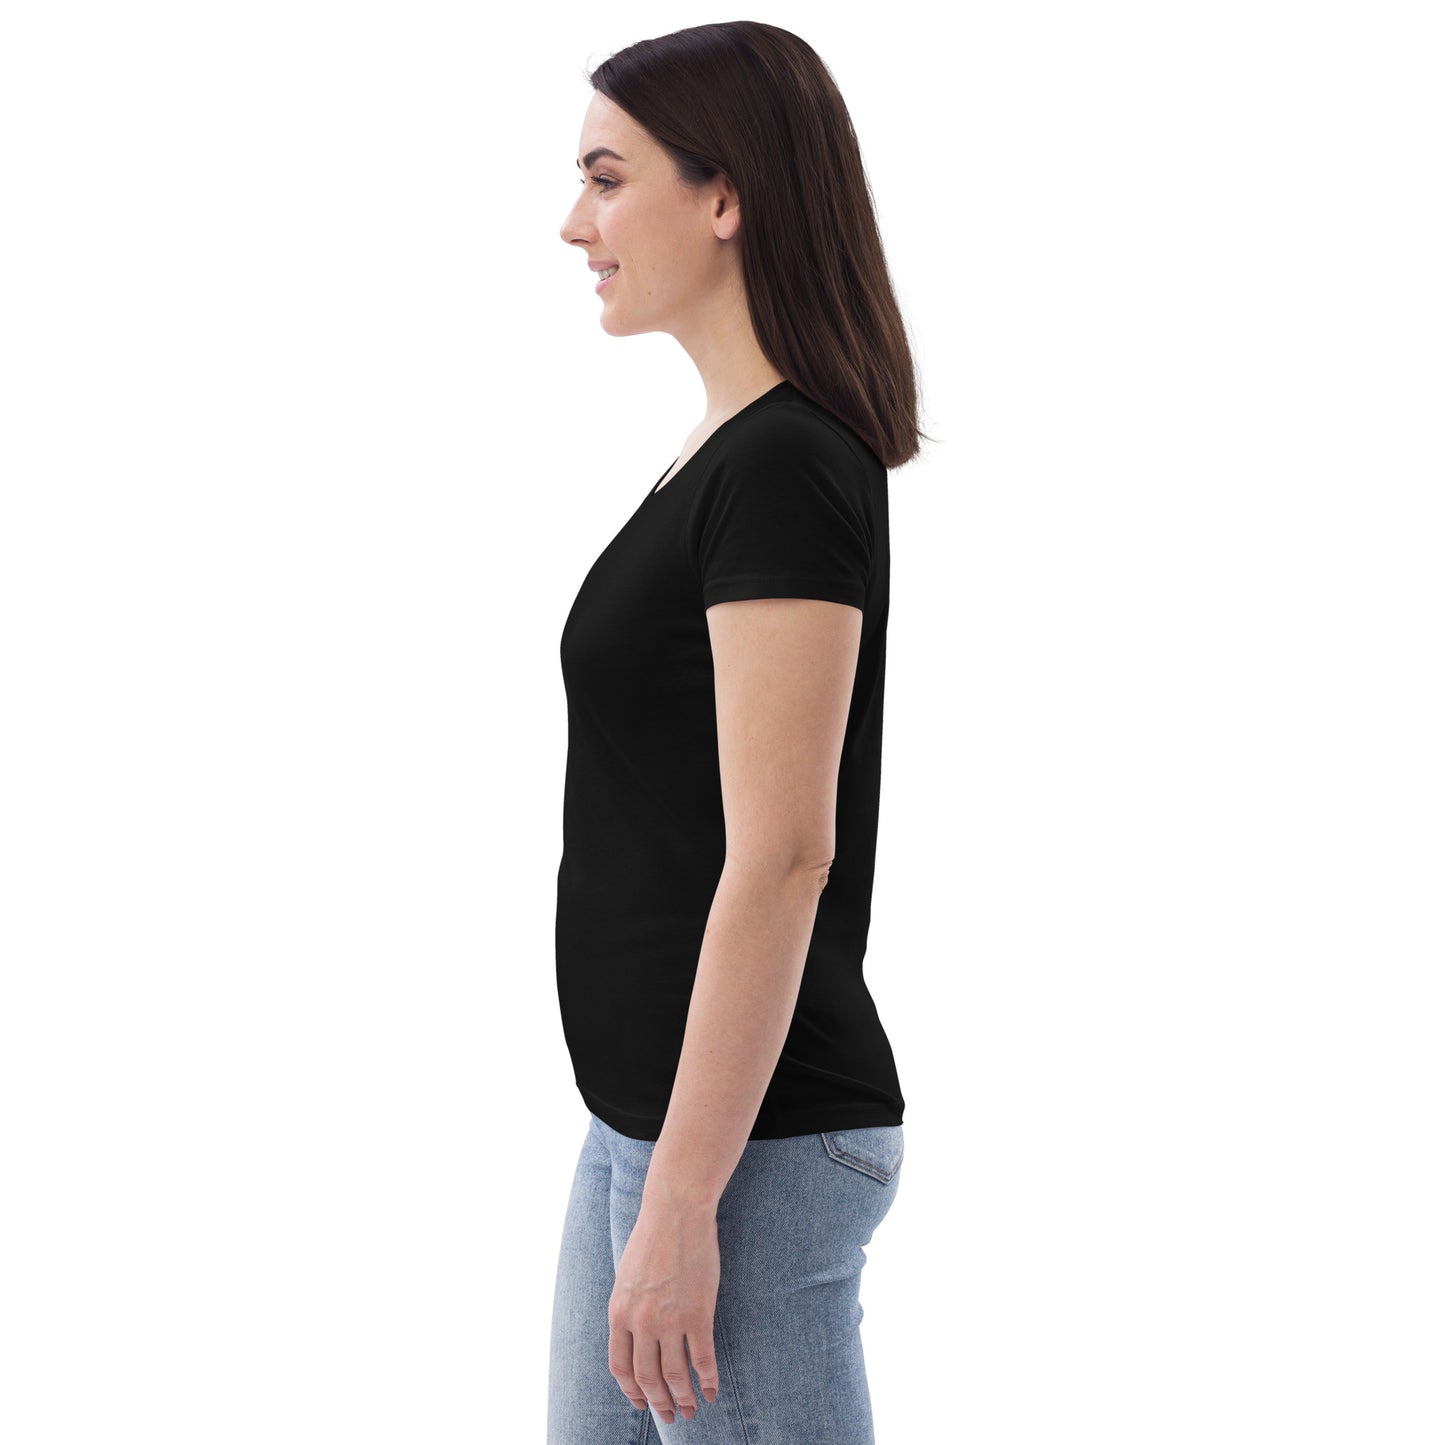 KH Women's Fitted Tee